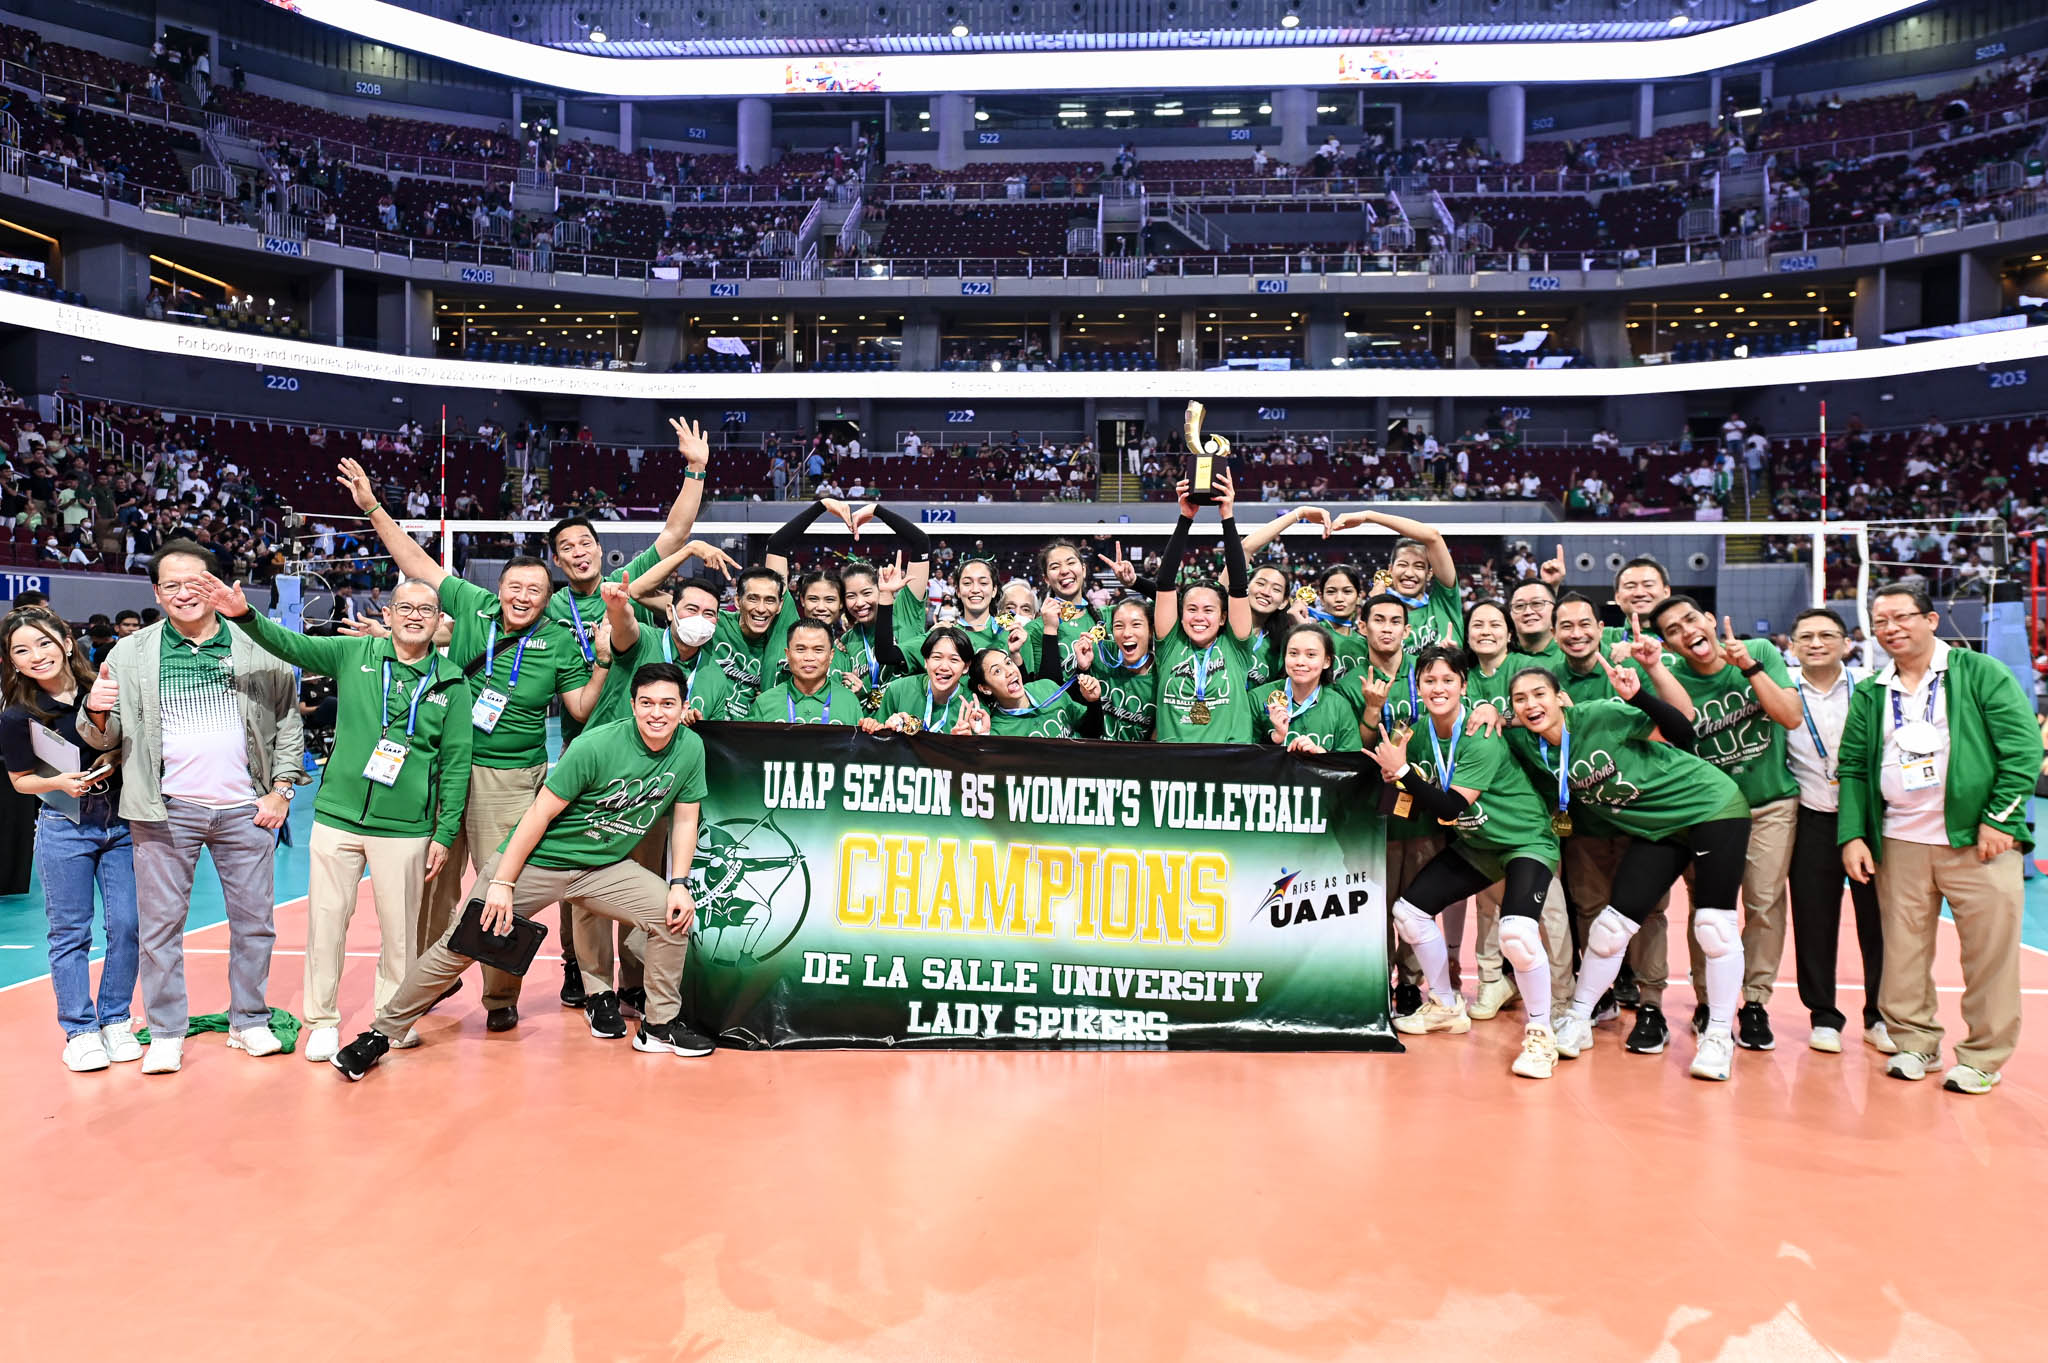 DLSU Lady Spikers defeat NU to win the UAAP Volleyball title